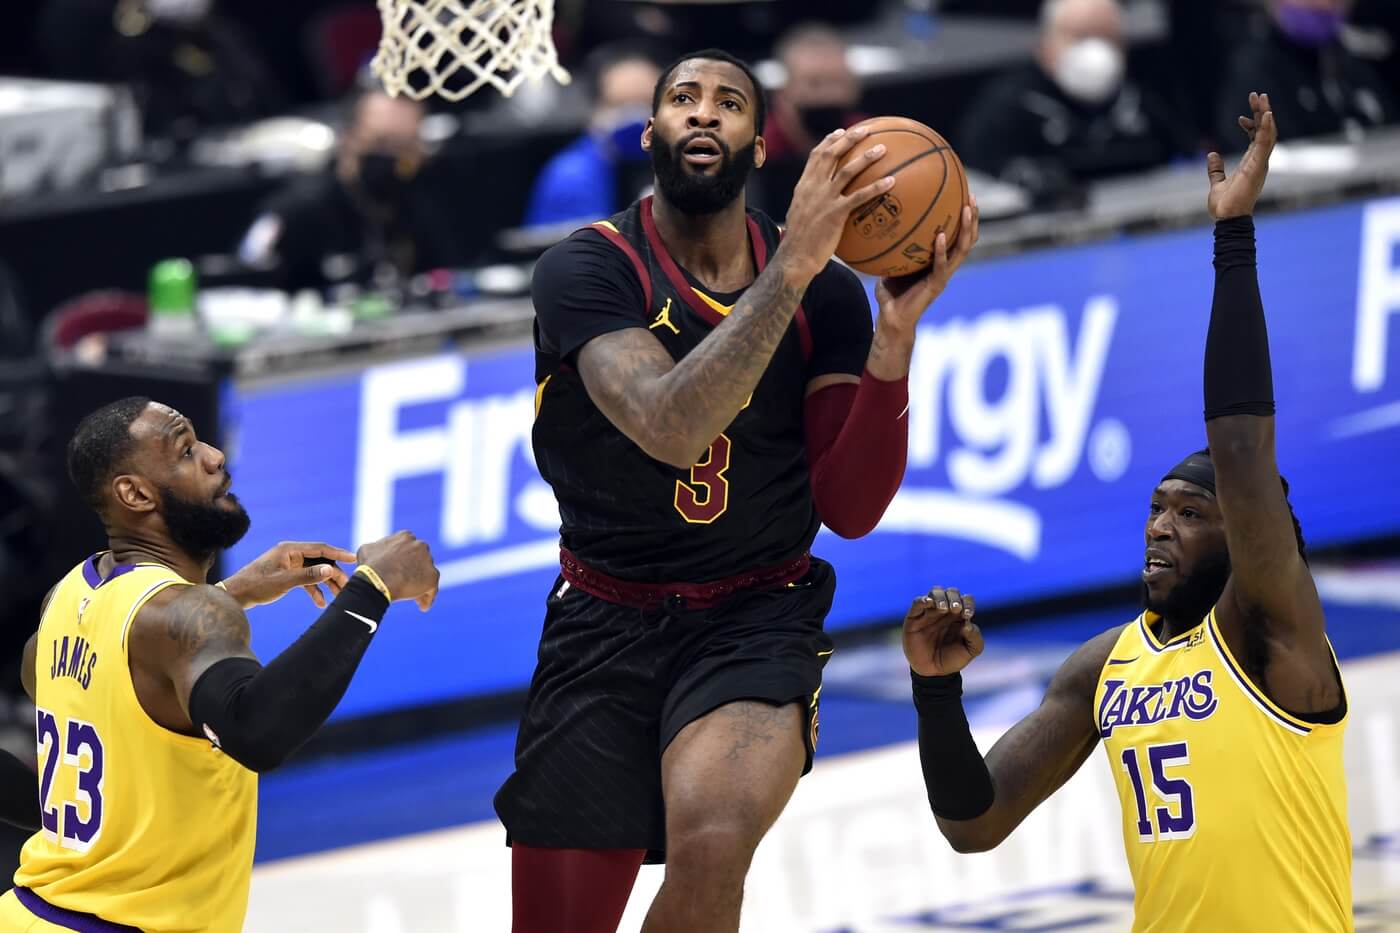 Jan 25, 2021; Cleveland, Ohio, USA; Cleveland Cavaliers center Andre Drummond (3) drives between Los Angeles Lakers forward LeBron James (23) and center Montrezl Harrell (15) in the first quarter at Rocket Mortgage FieldHouse. Mandatory Credit: David Richard-USA TODAY Sports